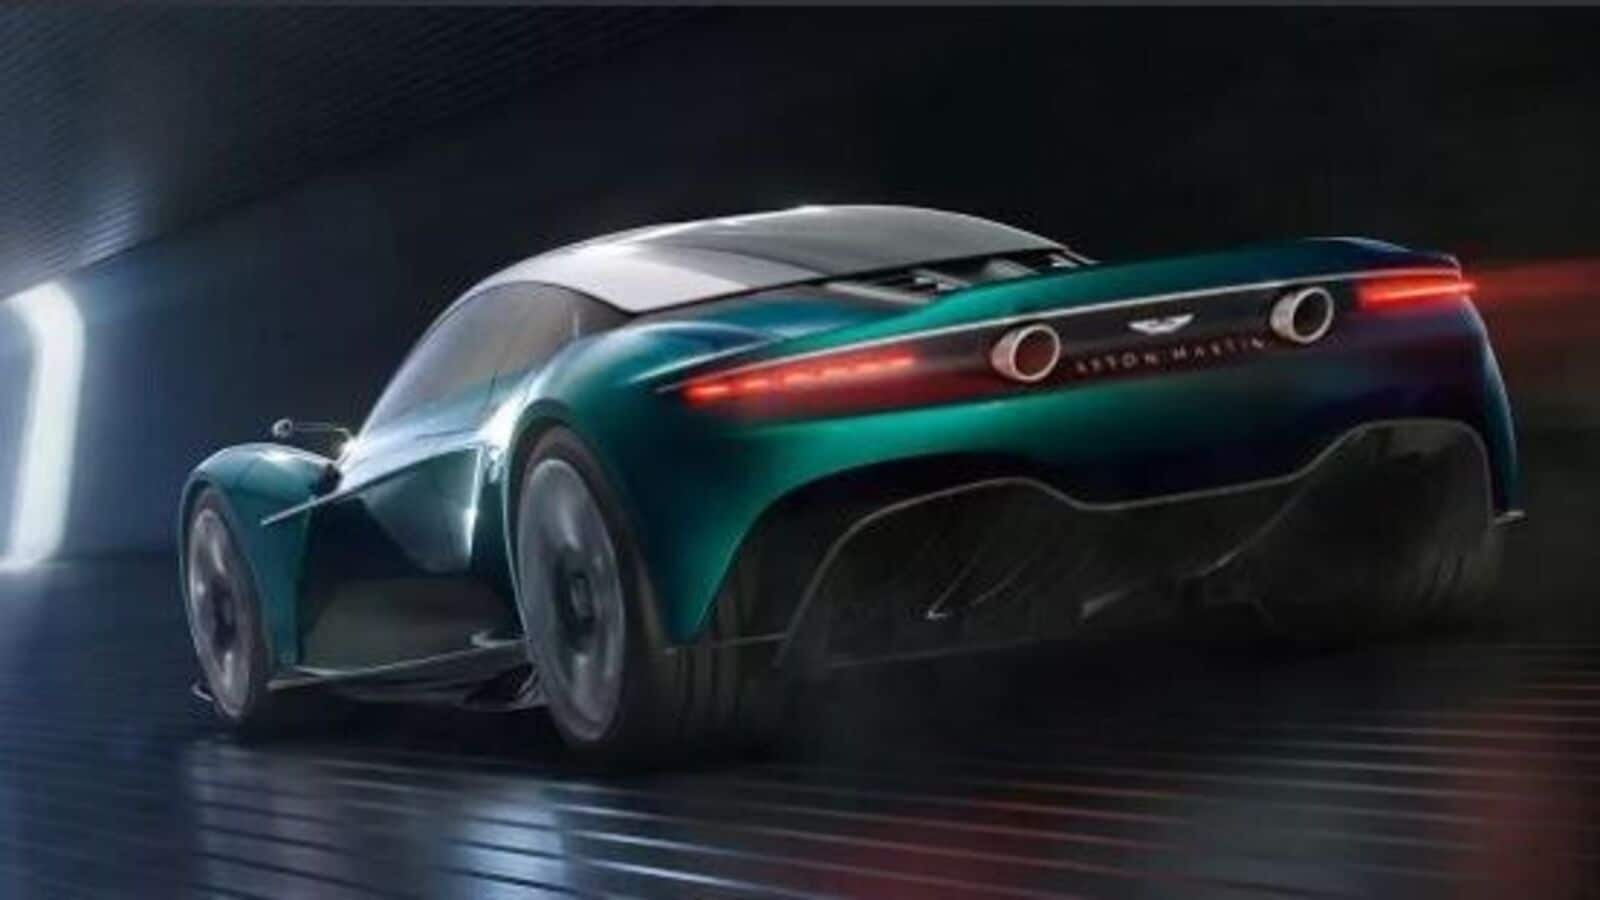 Aston Martin's Upcoming Entry Level Supercar To Feature Electrified V8: Report